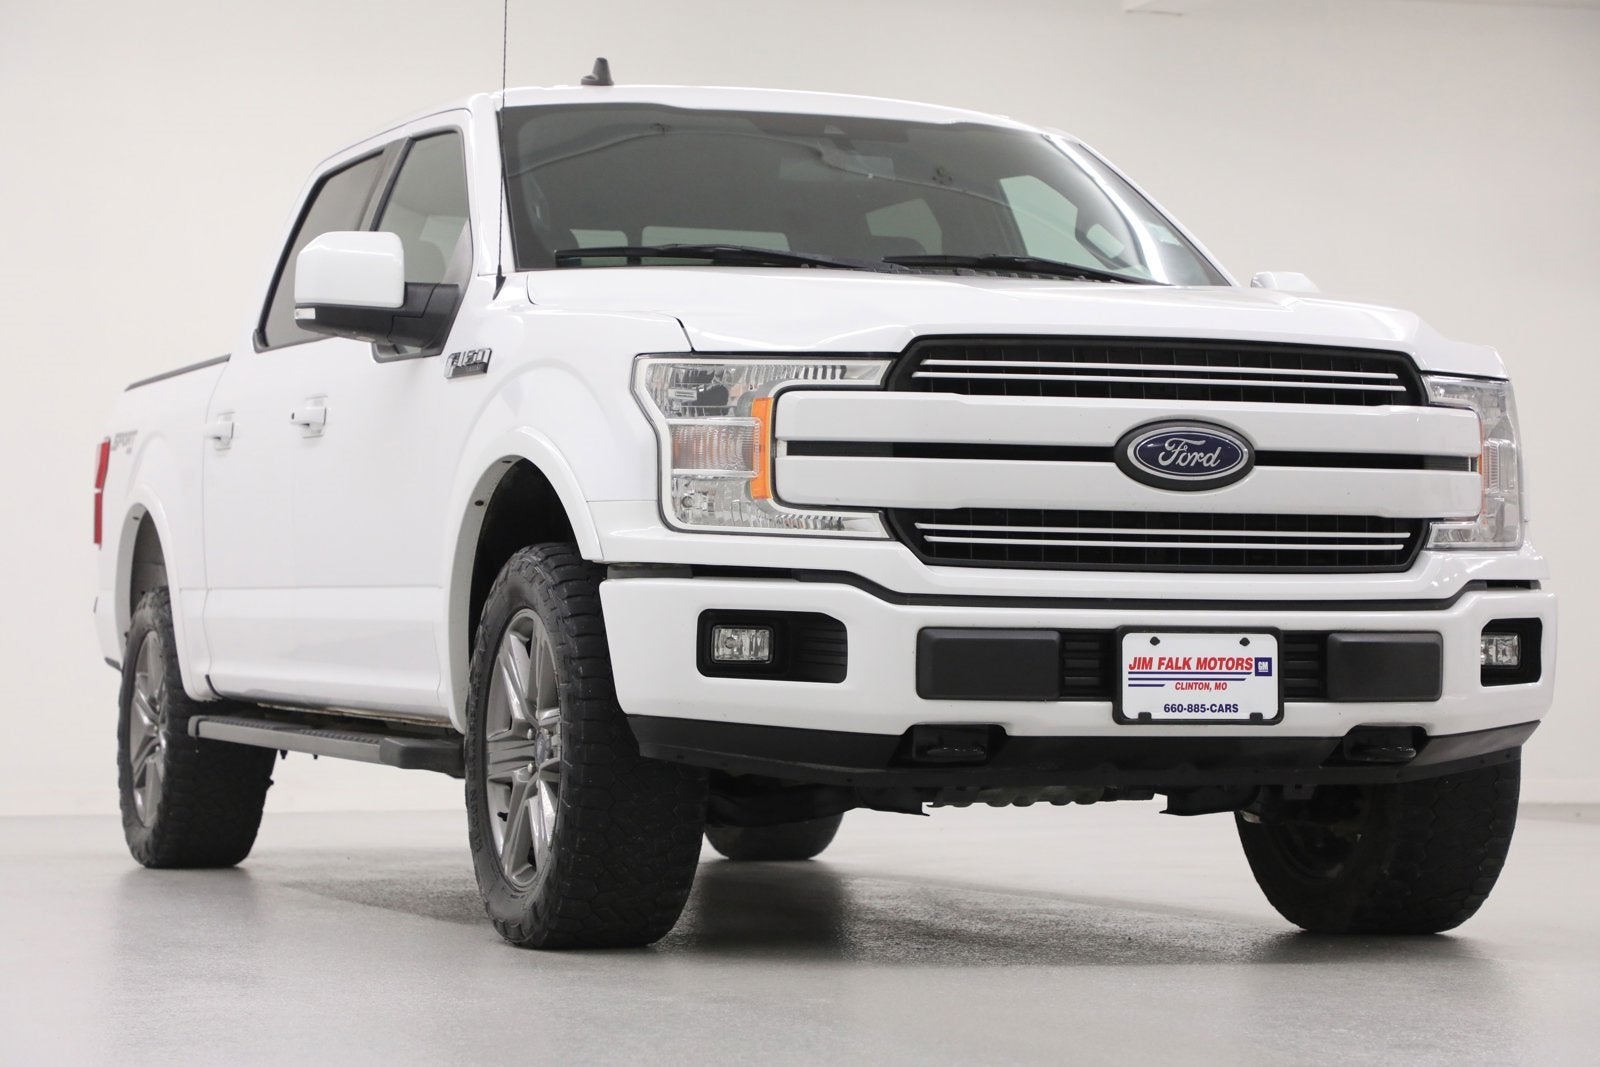 2020 Ford F-150 SuperCrew Lariat 4WD Heated Cooled Leather 5.0L V8 HD Rear Camera Navigation Remote Start Cruise